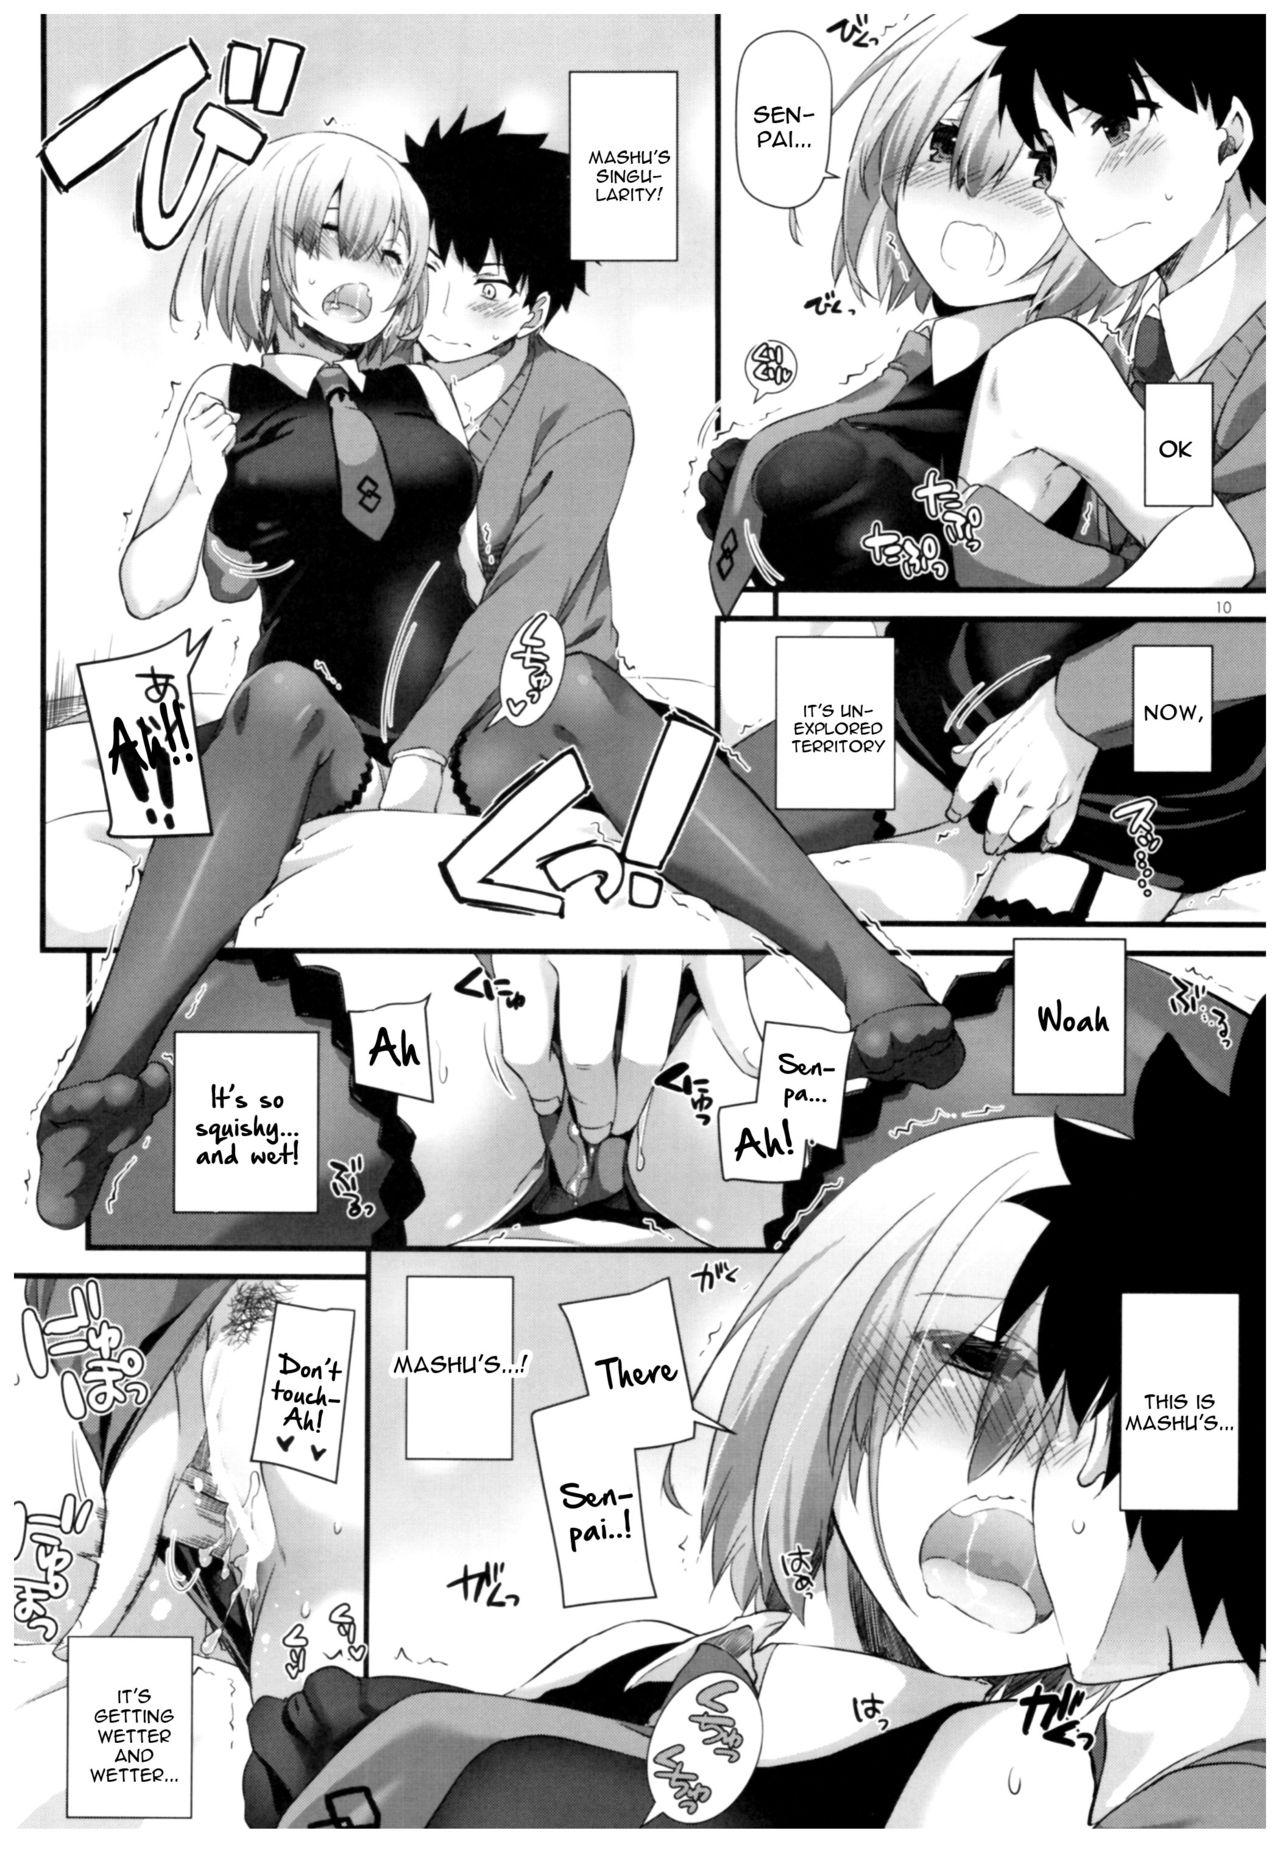 Porn Star D.L. action 114 - Fate grand order Free Blow Job - Page 9